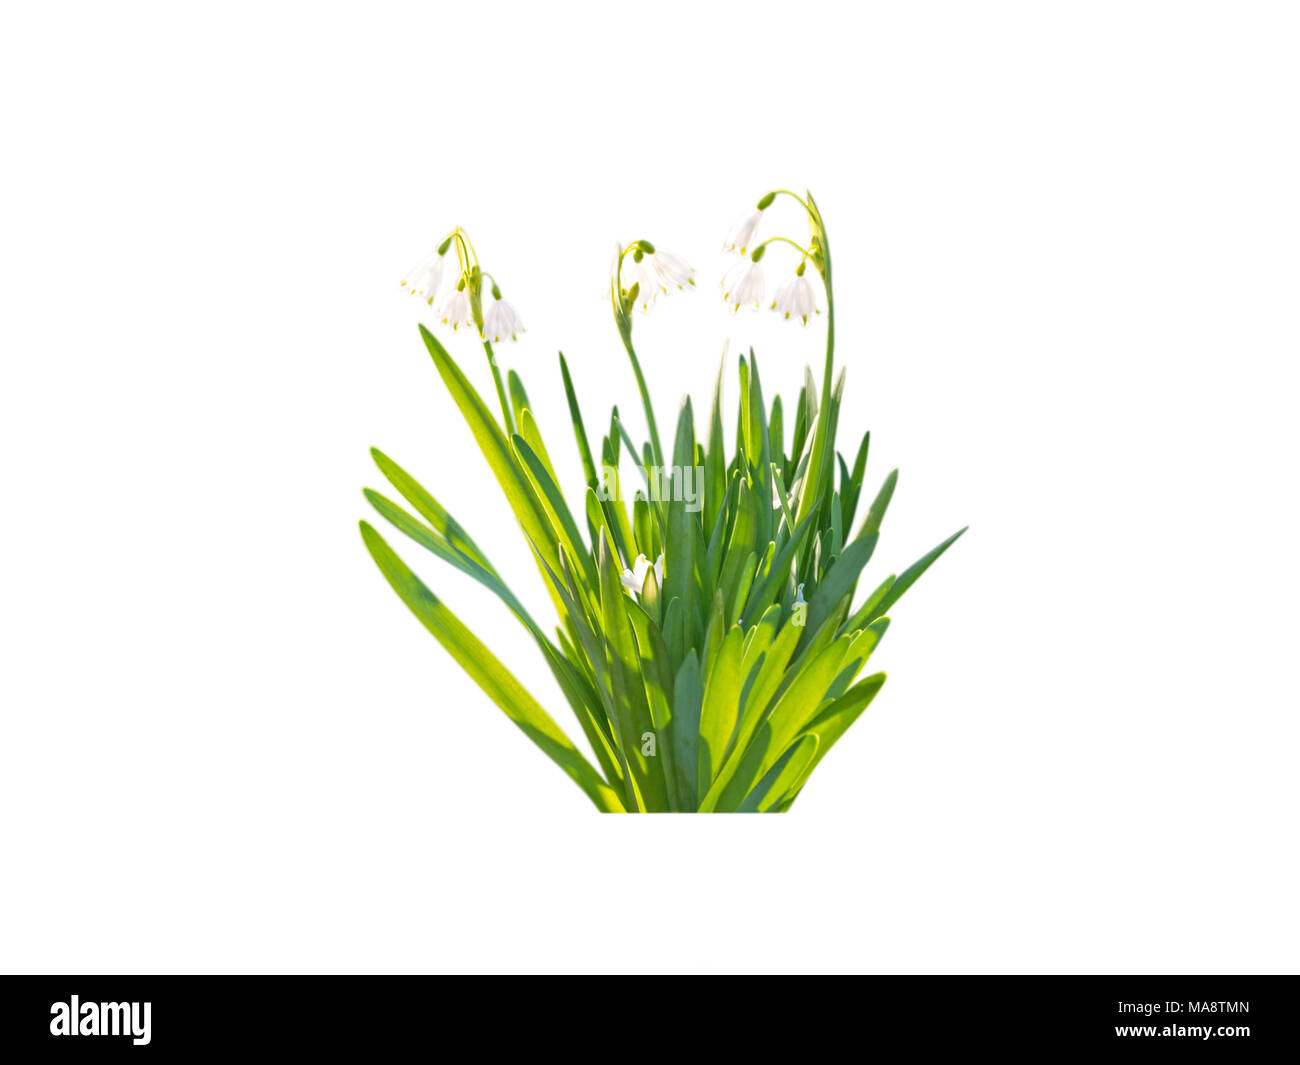 White snowdrop or galanthus spring flowers bunch isolated on white Stock Photo